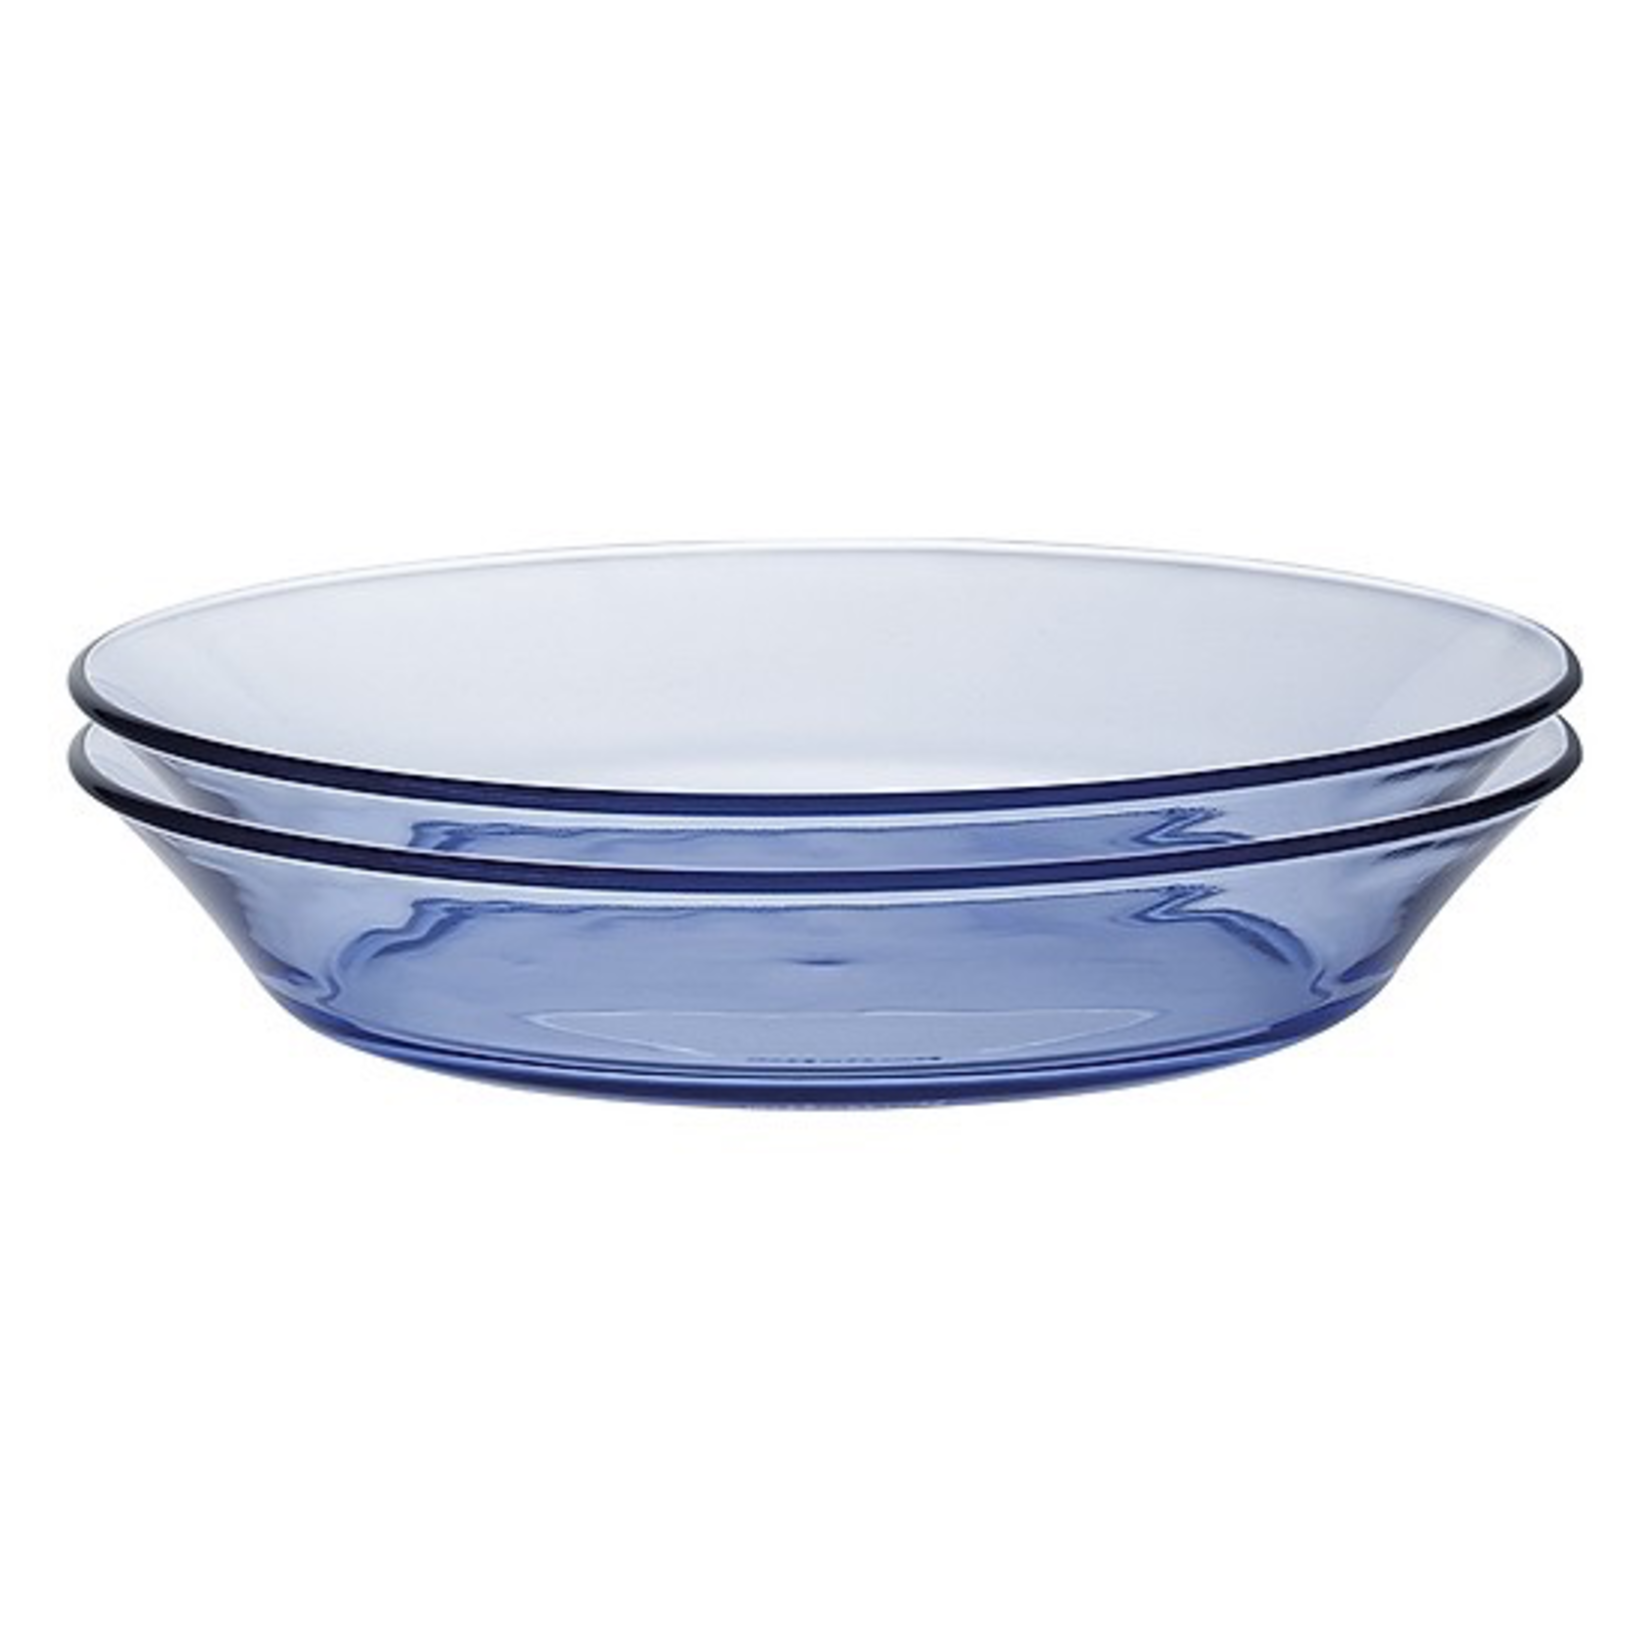 DURALEX USA, INC Special order 3007BF06/6 Durlaex Lys Marine Glass Soup Bowl  blue 7.63 in